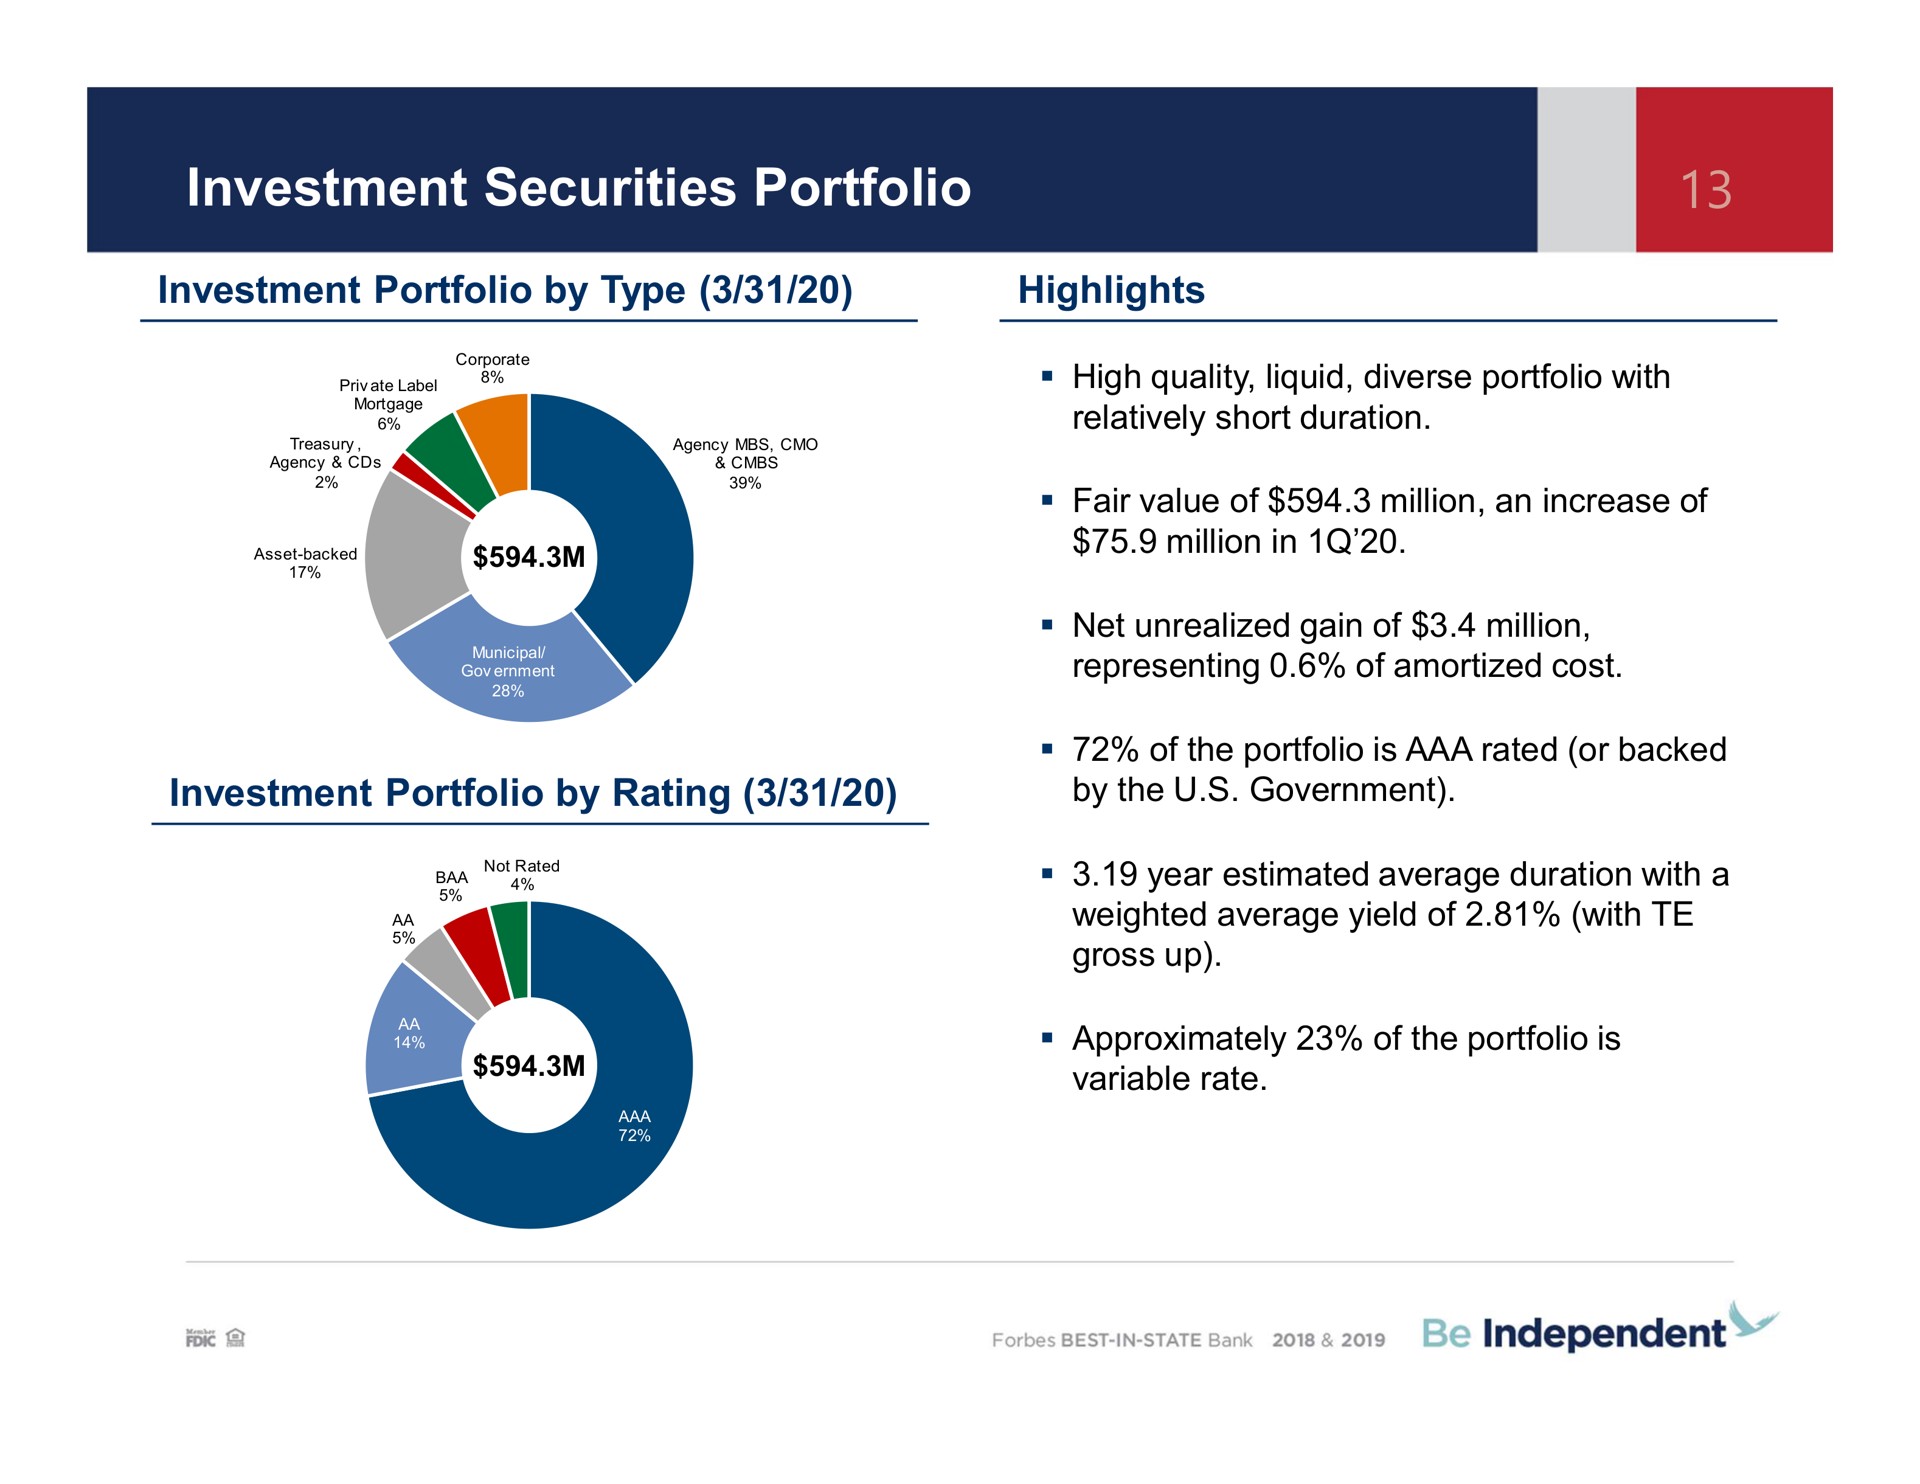 investment securities portfolio investment portfolio by type highlights investment portfolio by rating label high quality liquid diverse with representing of amortized cost the government | Independent Bank Corp